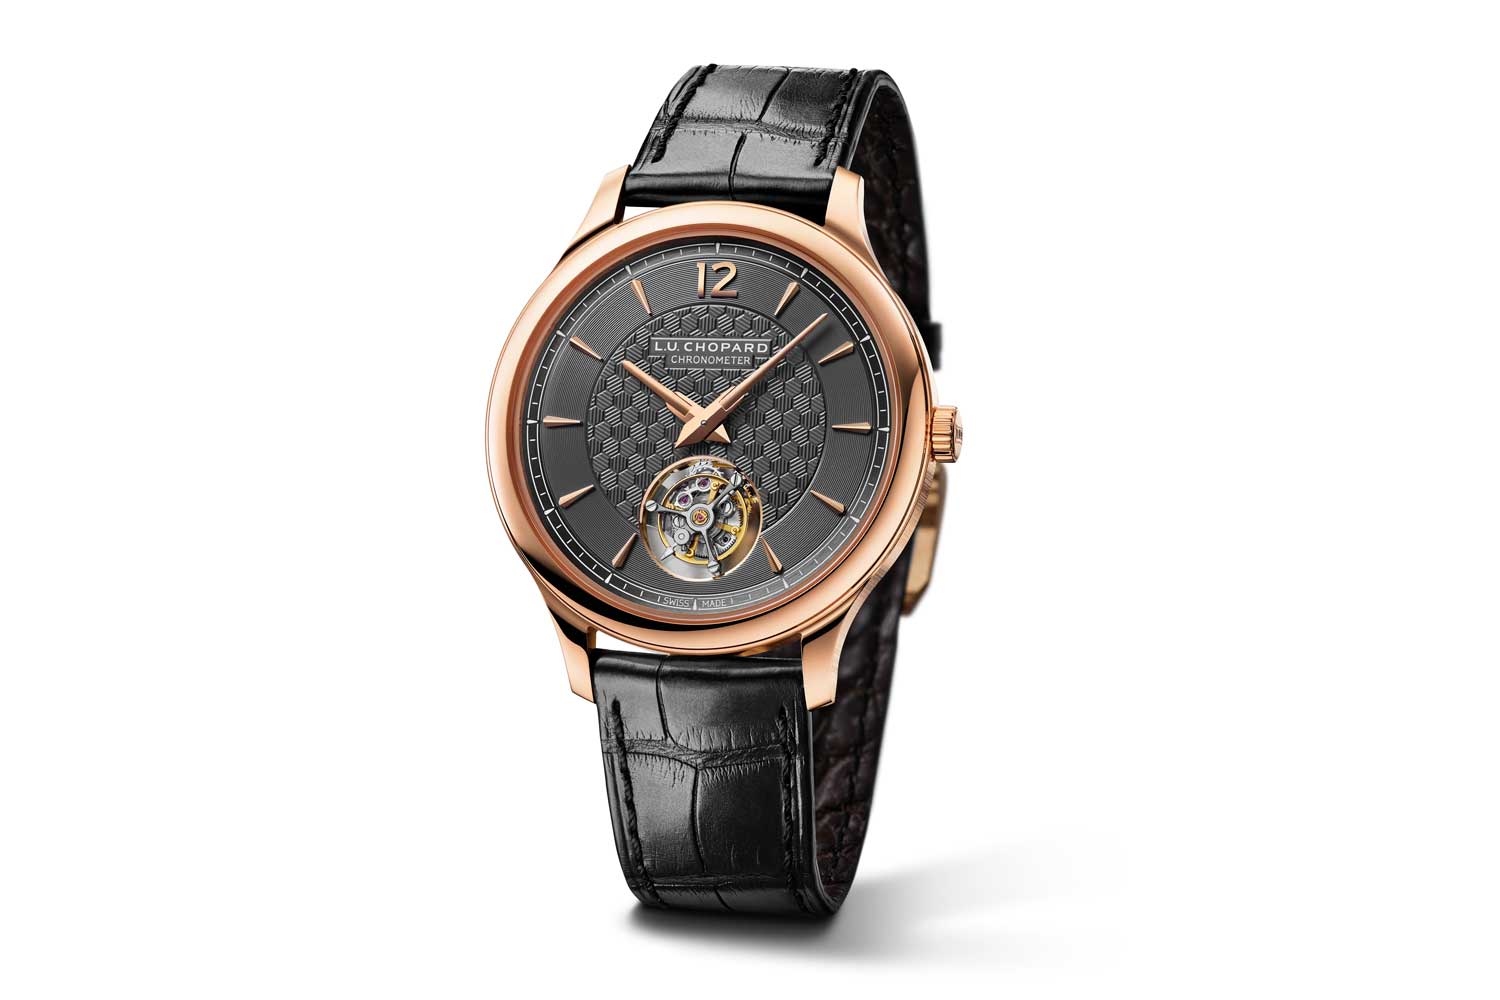 Launched at Baselworld 2019, the 40mm Chopard L.U.C Flying T Twin was powered by the L.U.C 96.24-L self-winding mechanical movement which was developed using the Caliber 1.96 as its base movement, therein, presenting the possibility of placing the movement into a watch that is of the same dimensions as the original 1860 at 36.5mm diameter